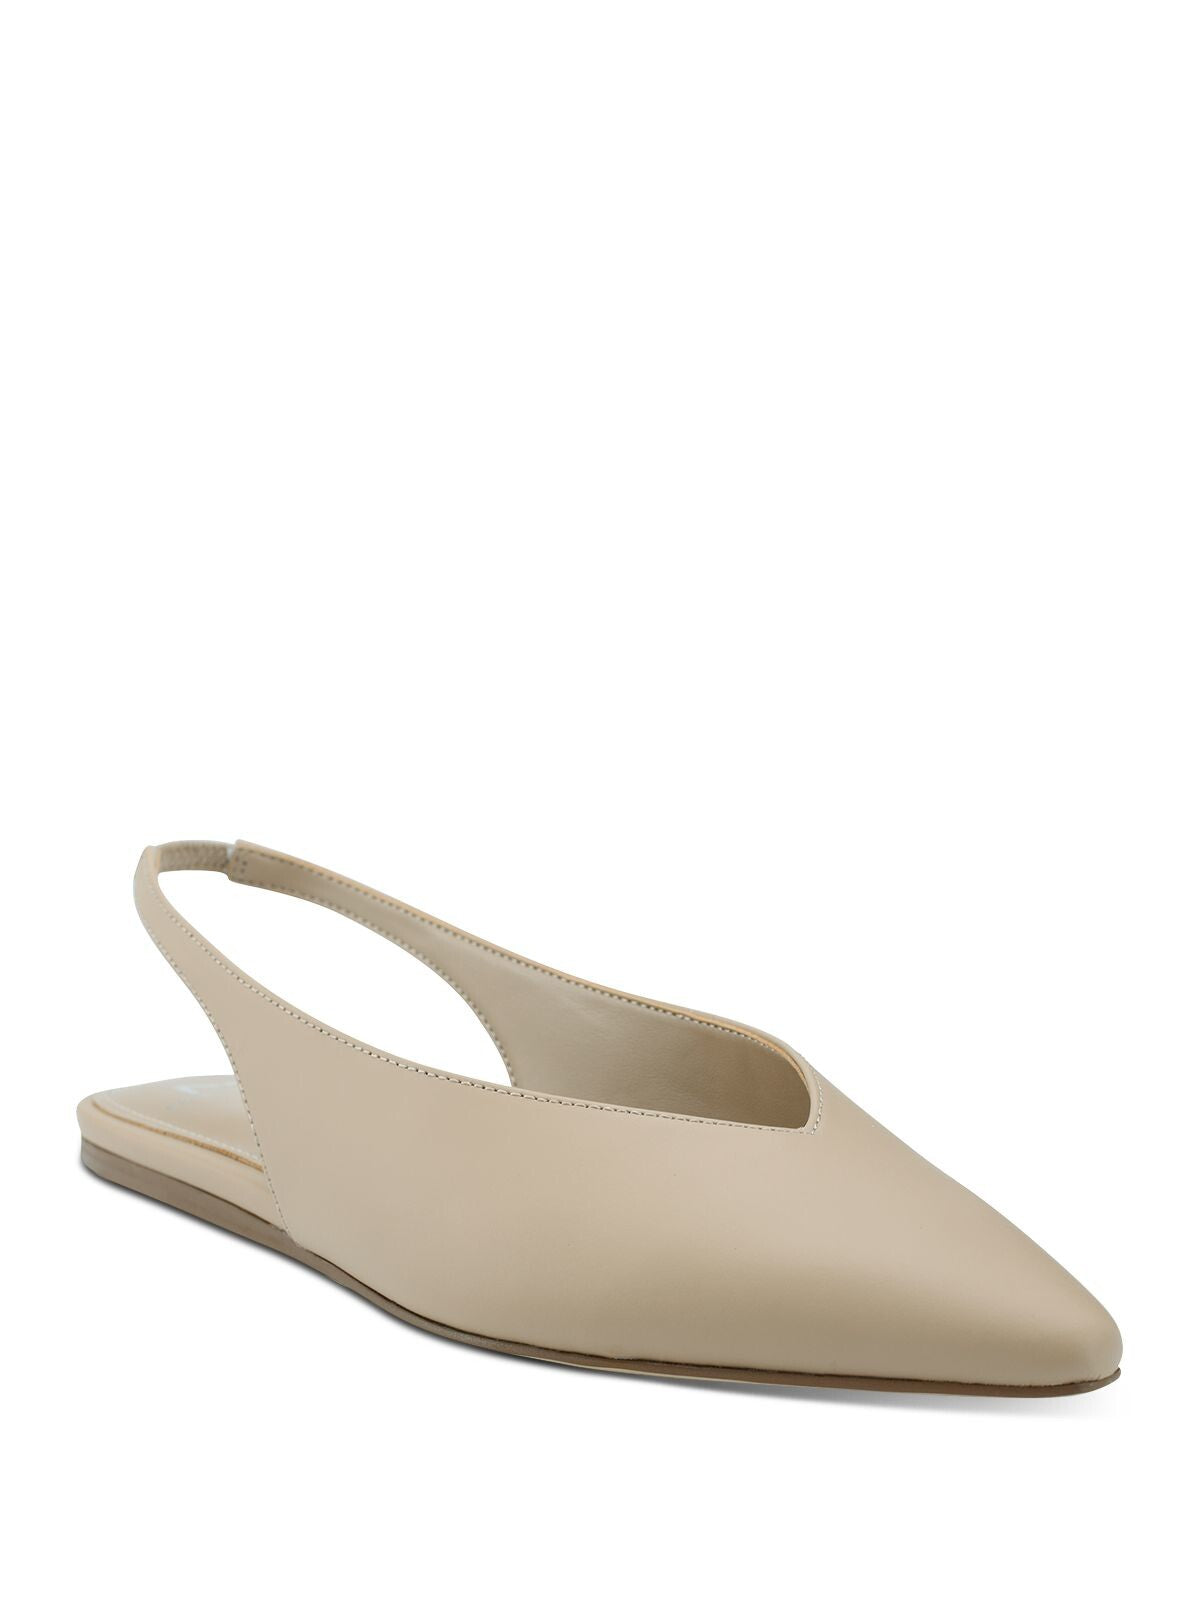 MARC FISHER Womens Beige Slingback Padded Graceful Pointed Toe Slip On Leather Flats Shoes 8 M